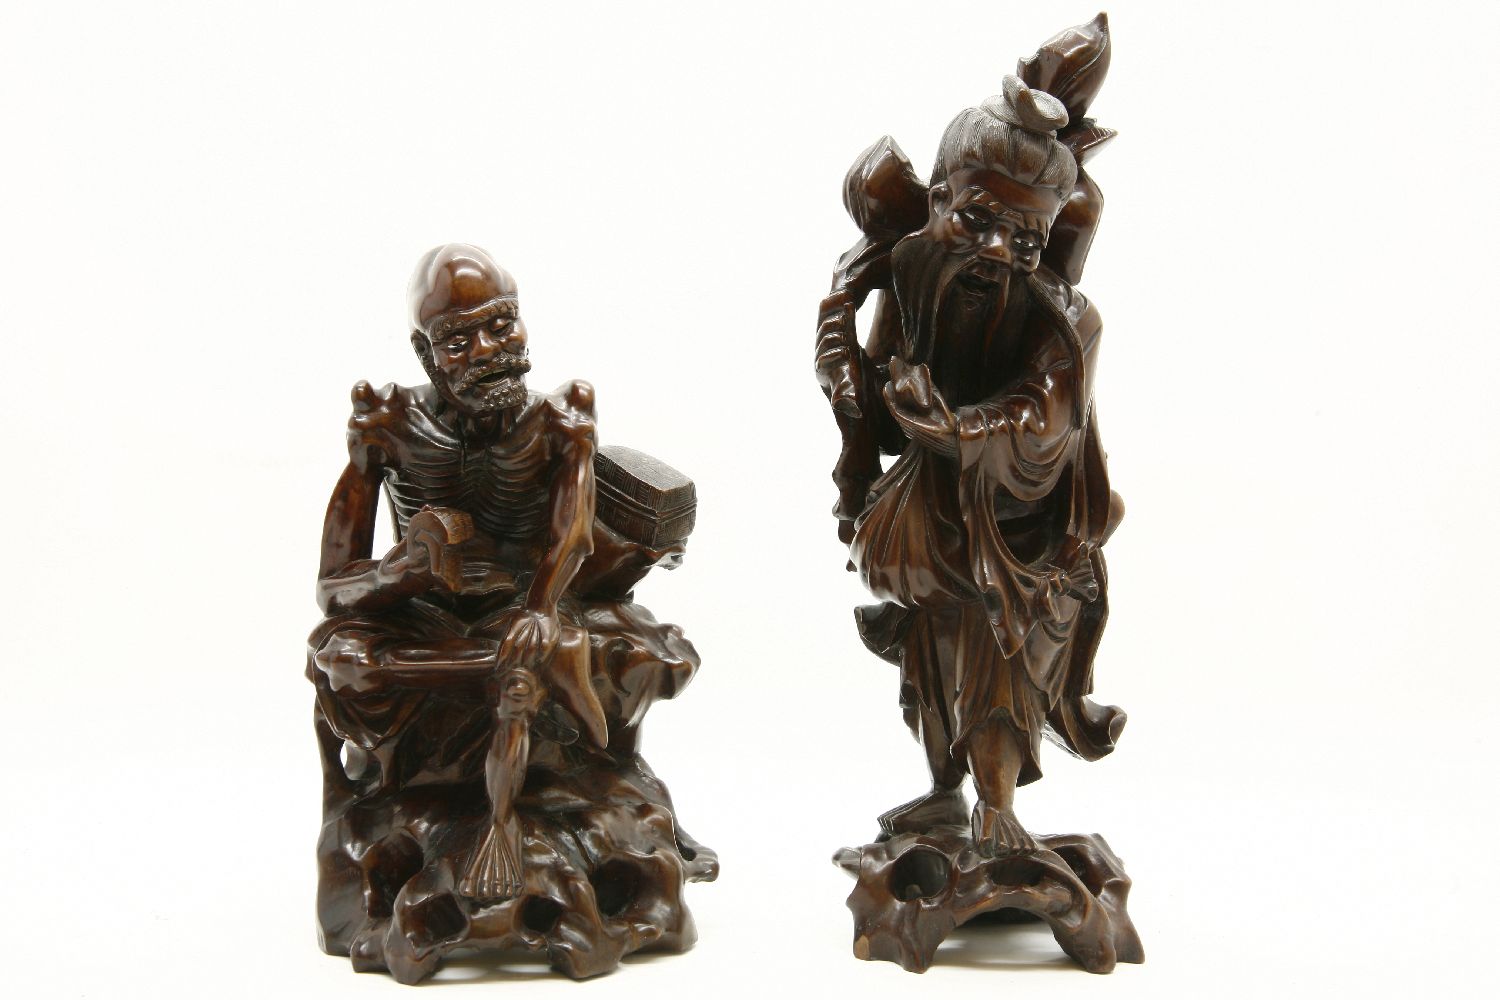 Two Chinese carved hardwood figures: one skeletal, seated, holding a book, the other holding a